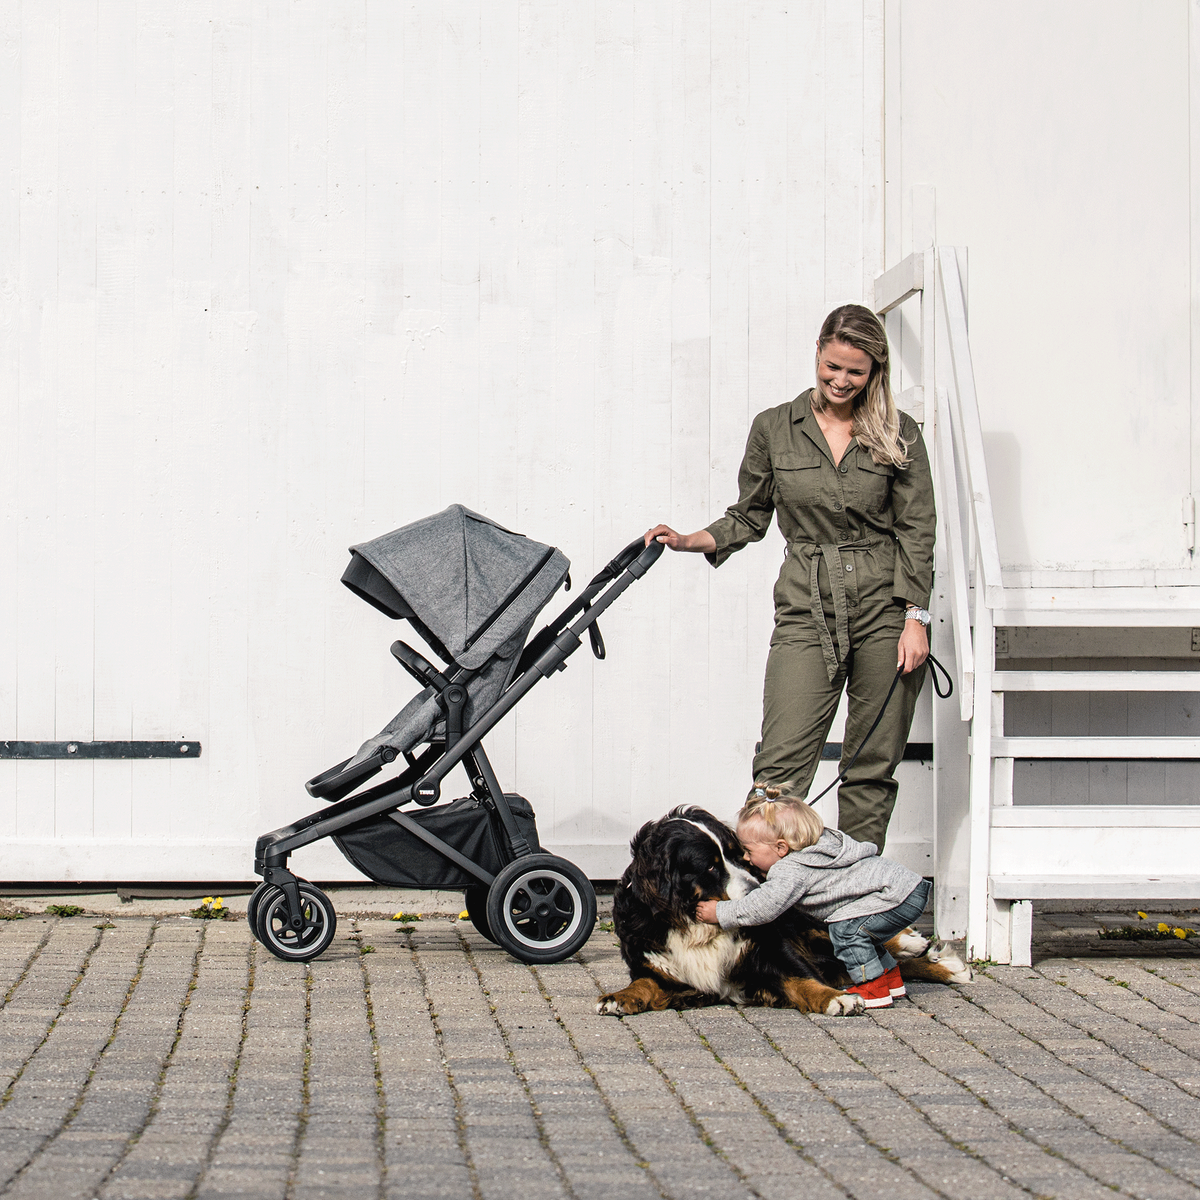 Next to a white garage door, a woman looks at her child while pushing a gray Thule Sleek baby stroller.